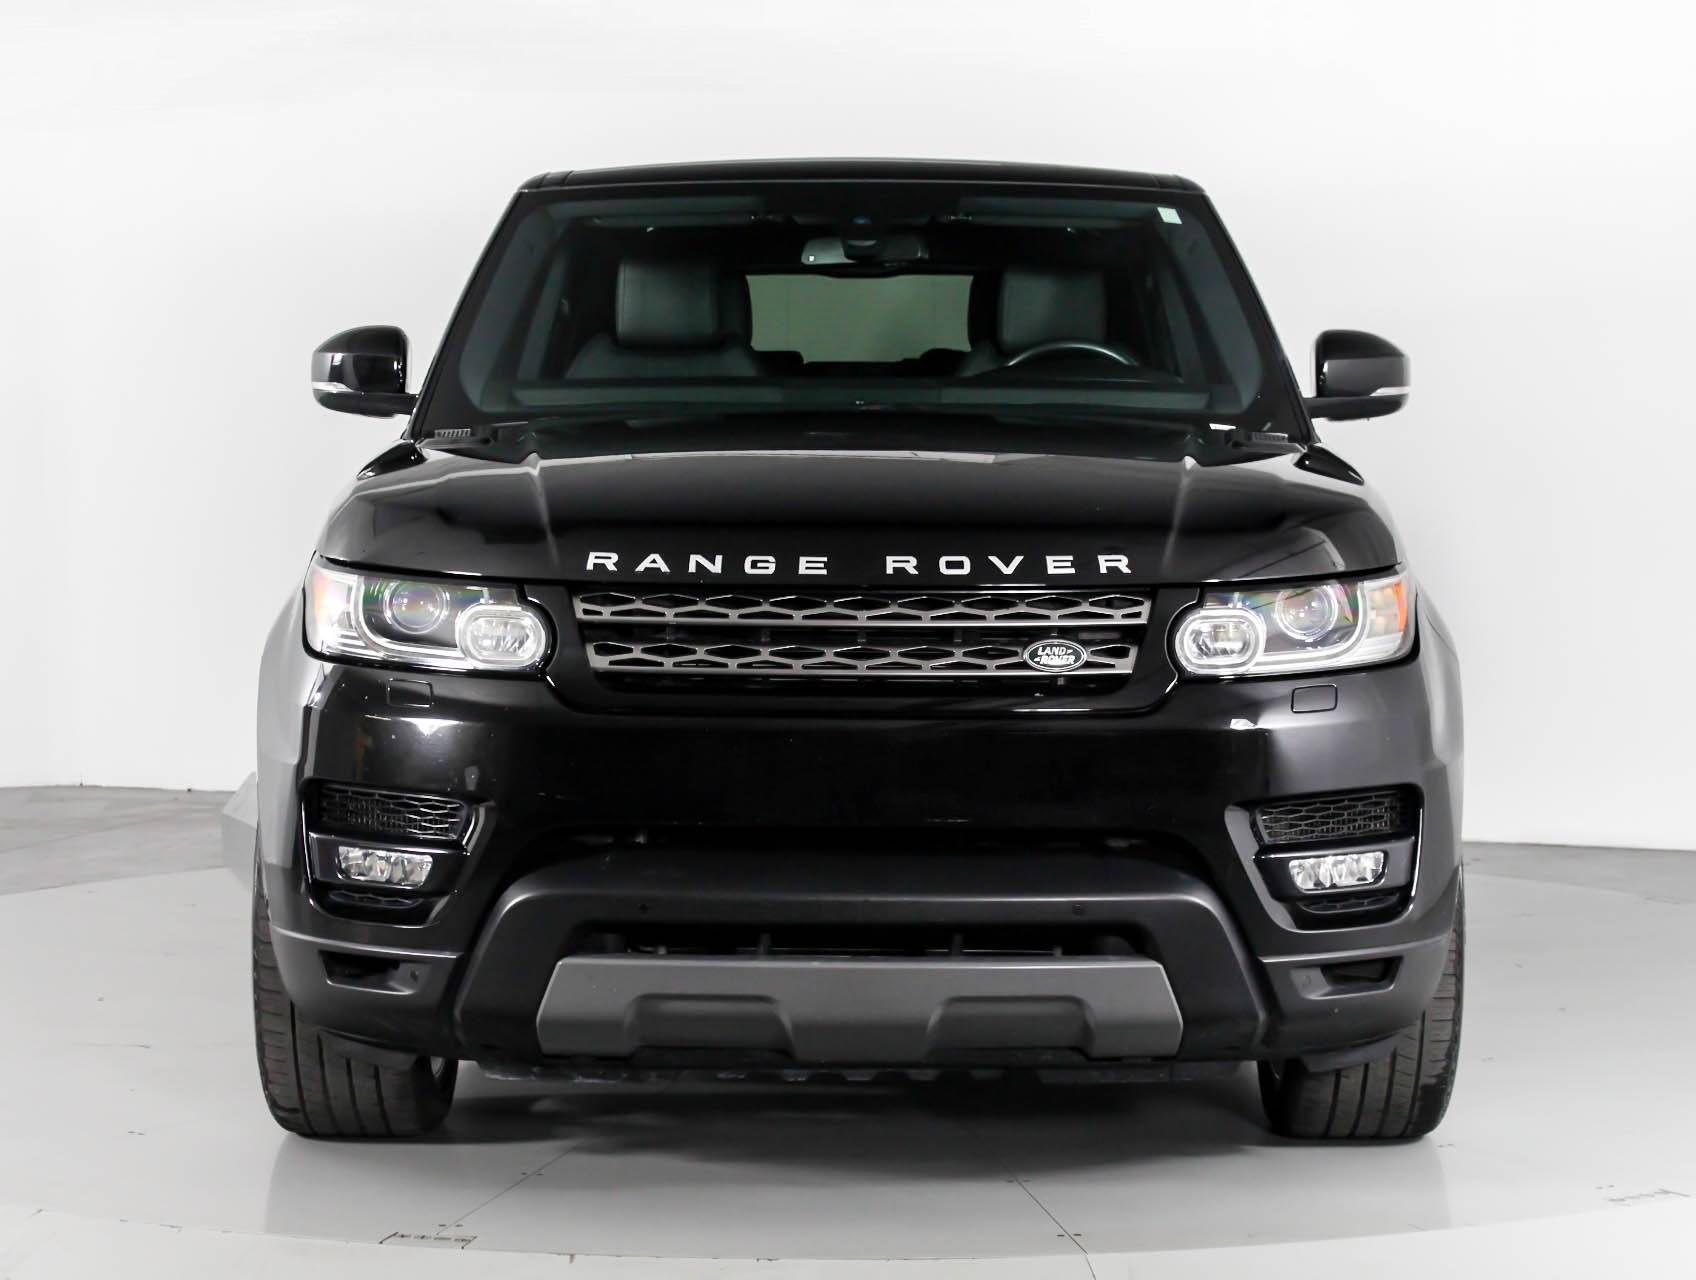 Florida Fine Cars - Used LAND ROVER RANGE ROVER SPORT 2015 HOLLYWOOD Supercharged Hse